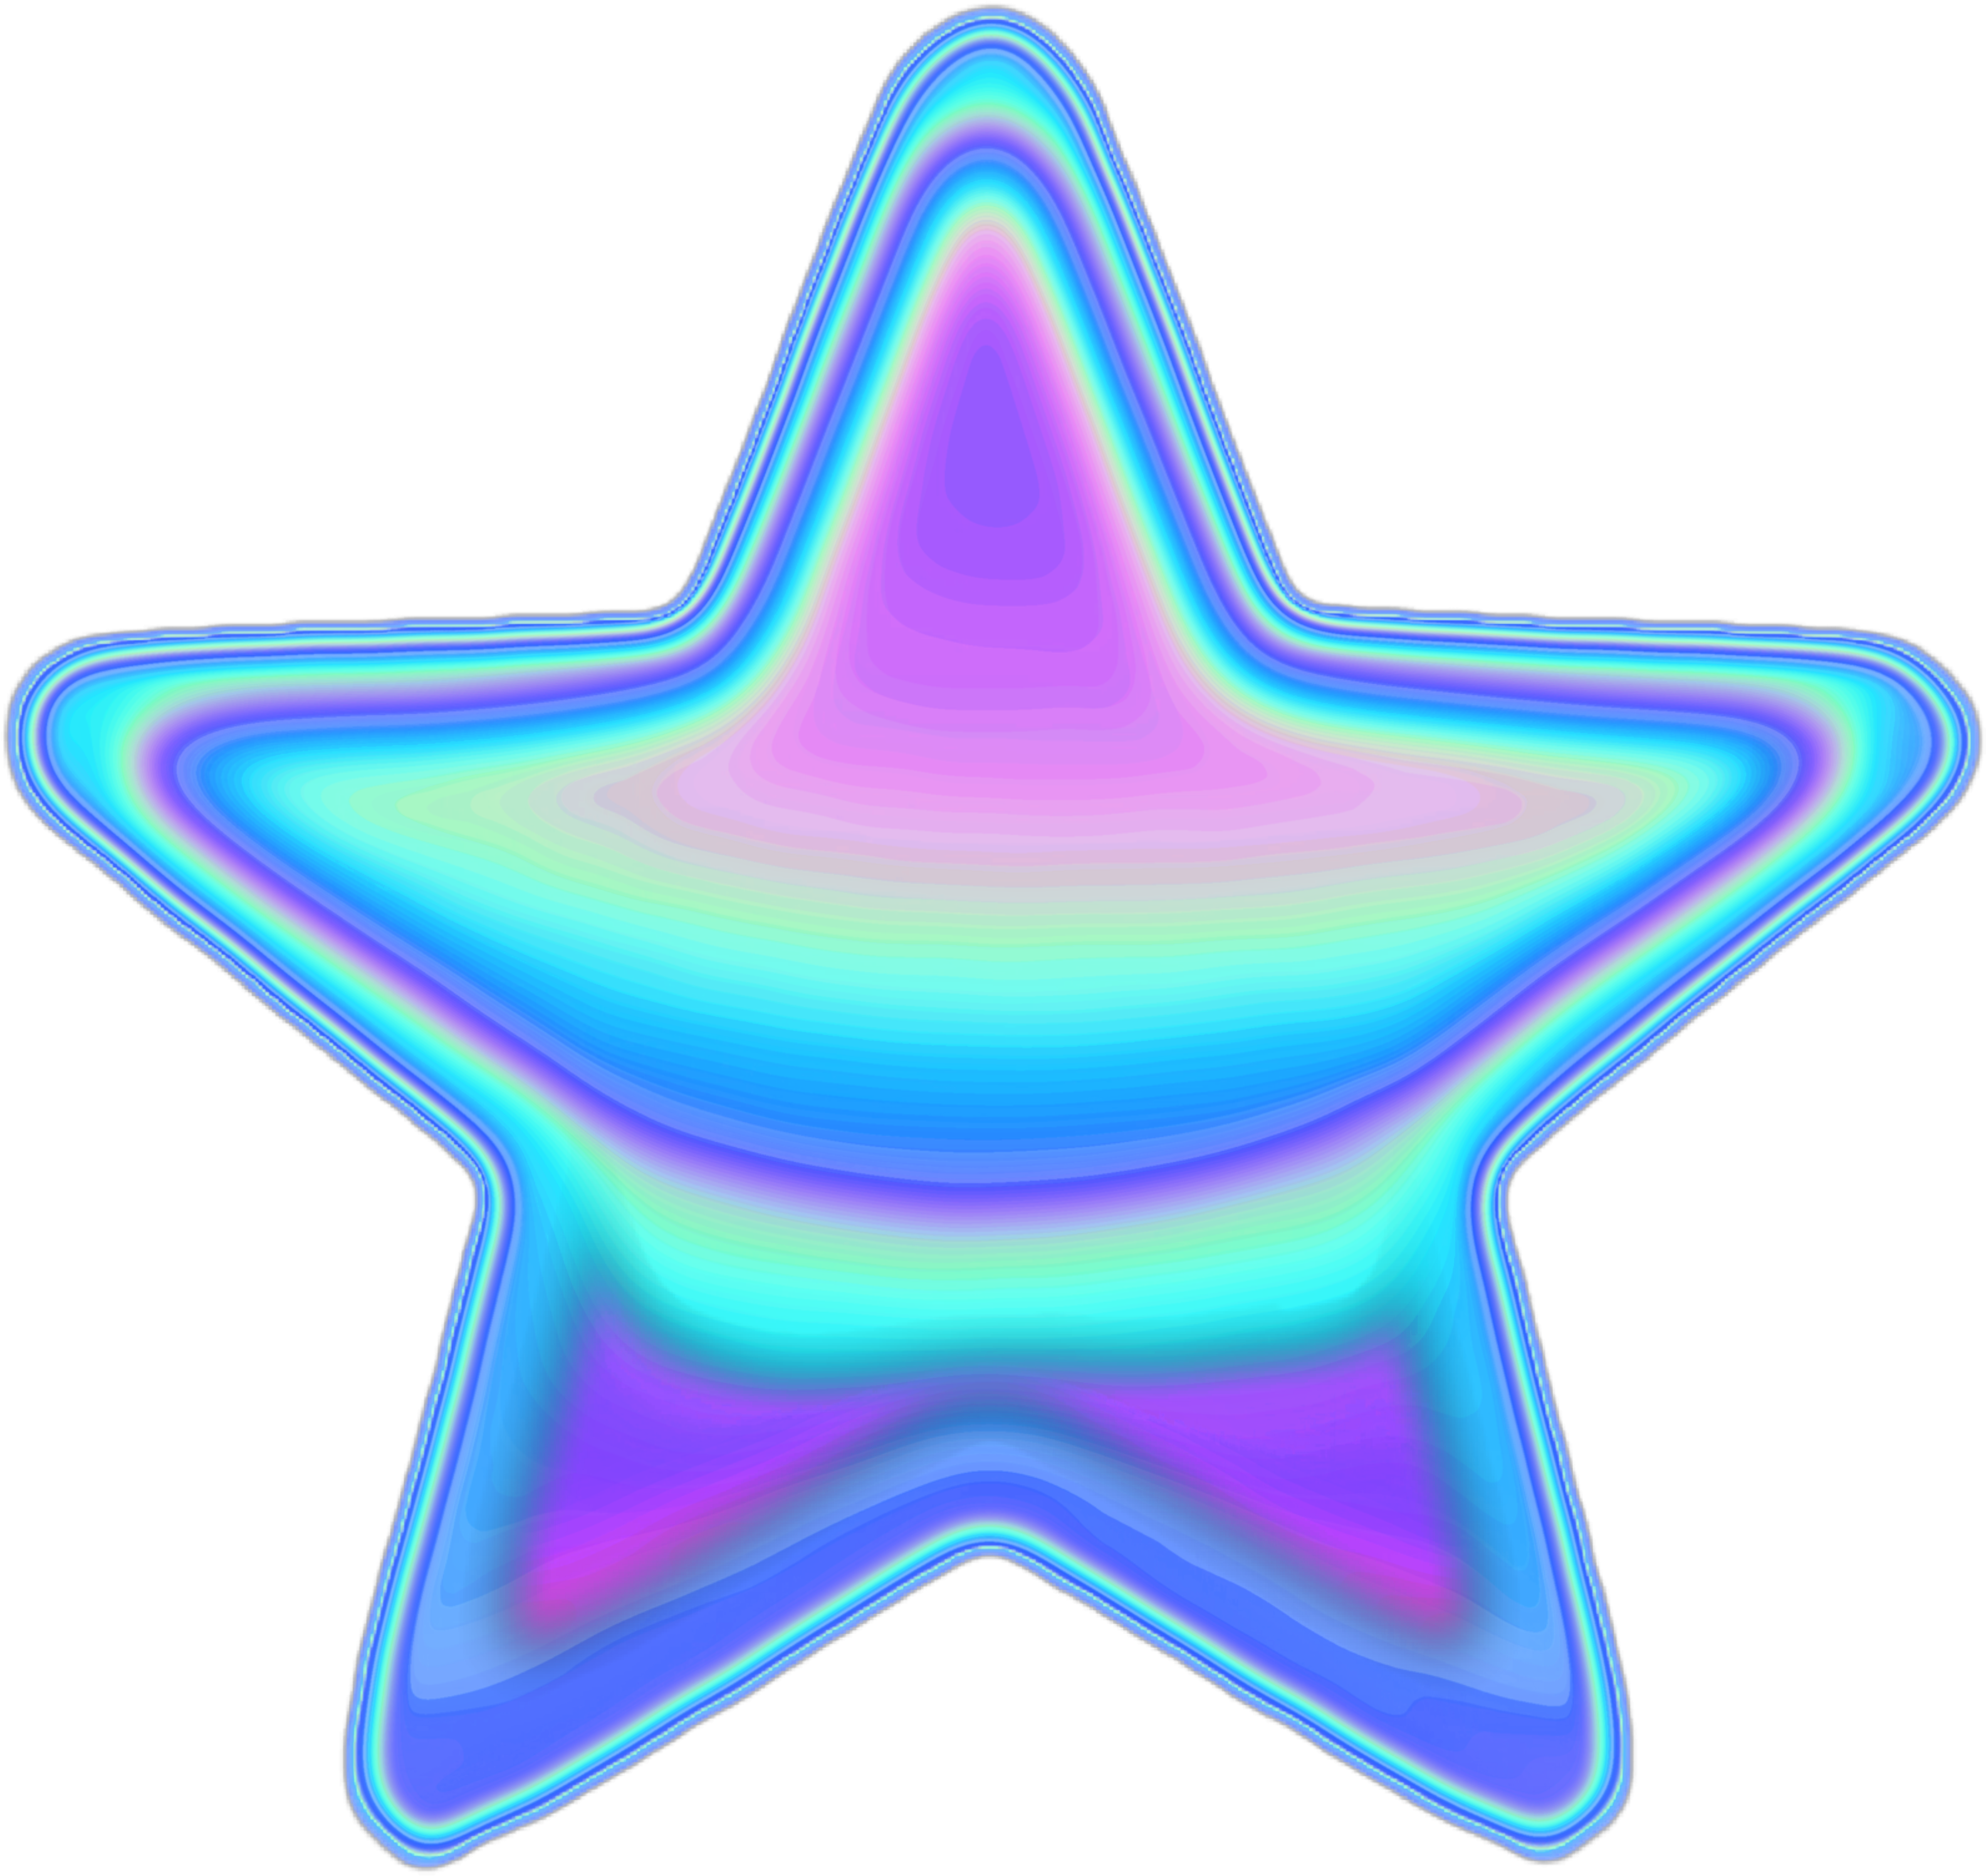 A Colorful Star On A Black Background